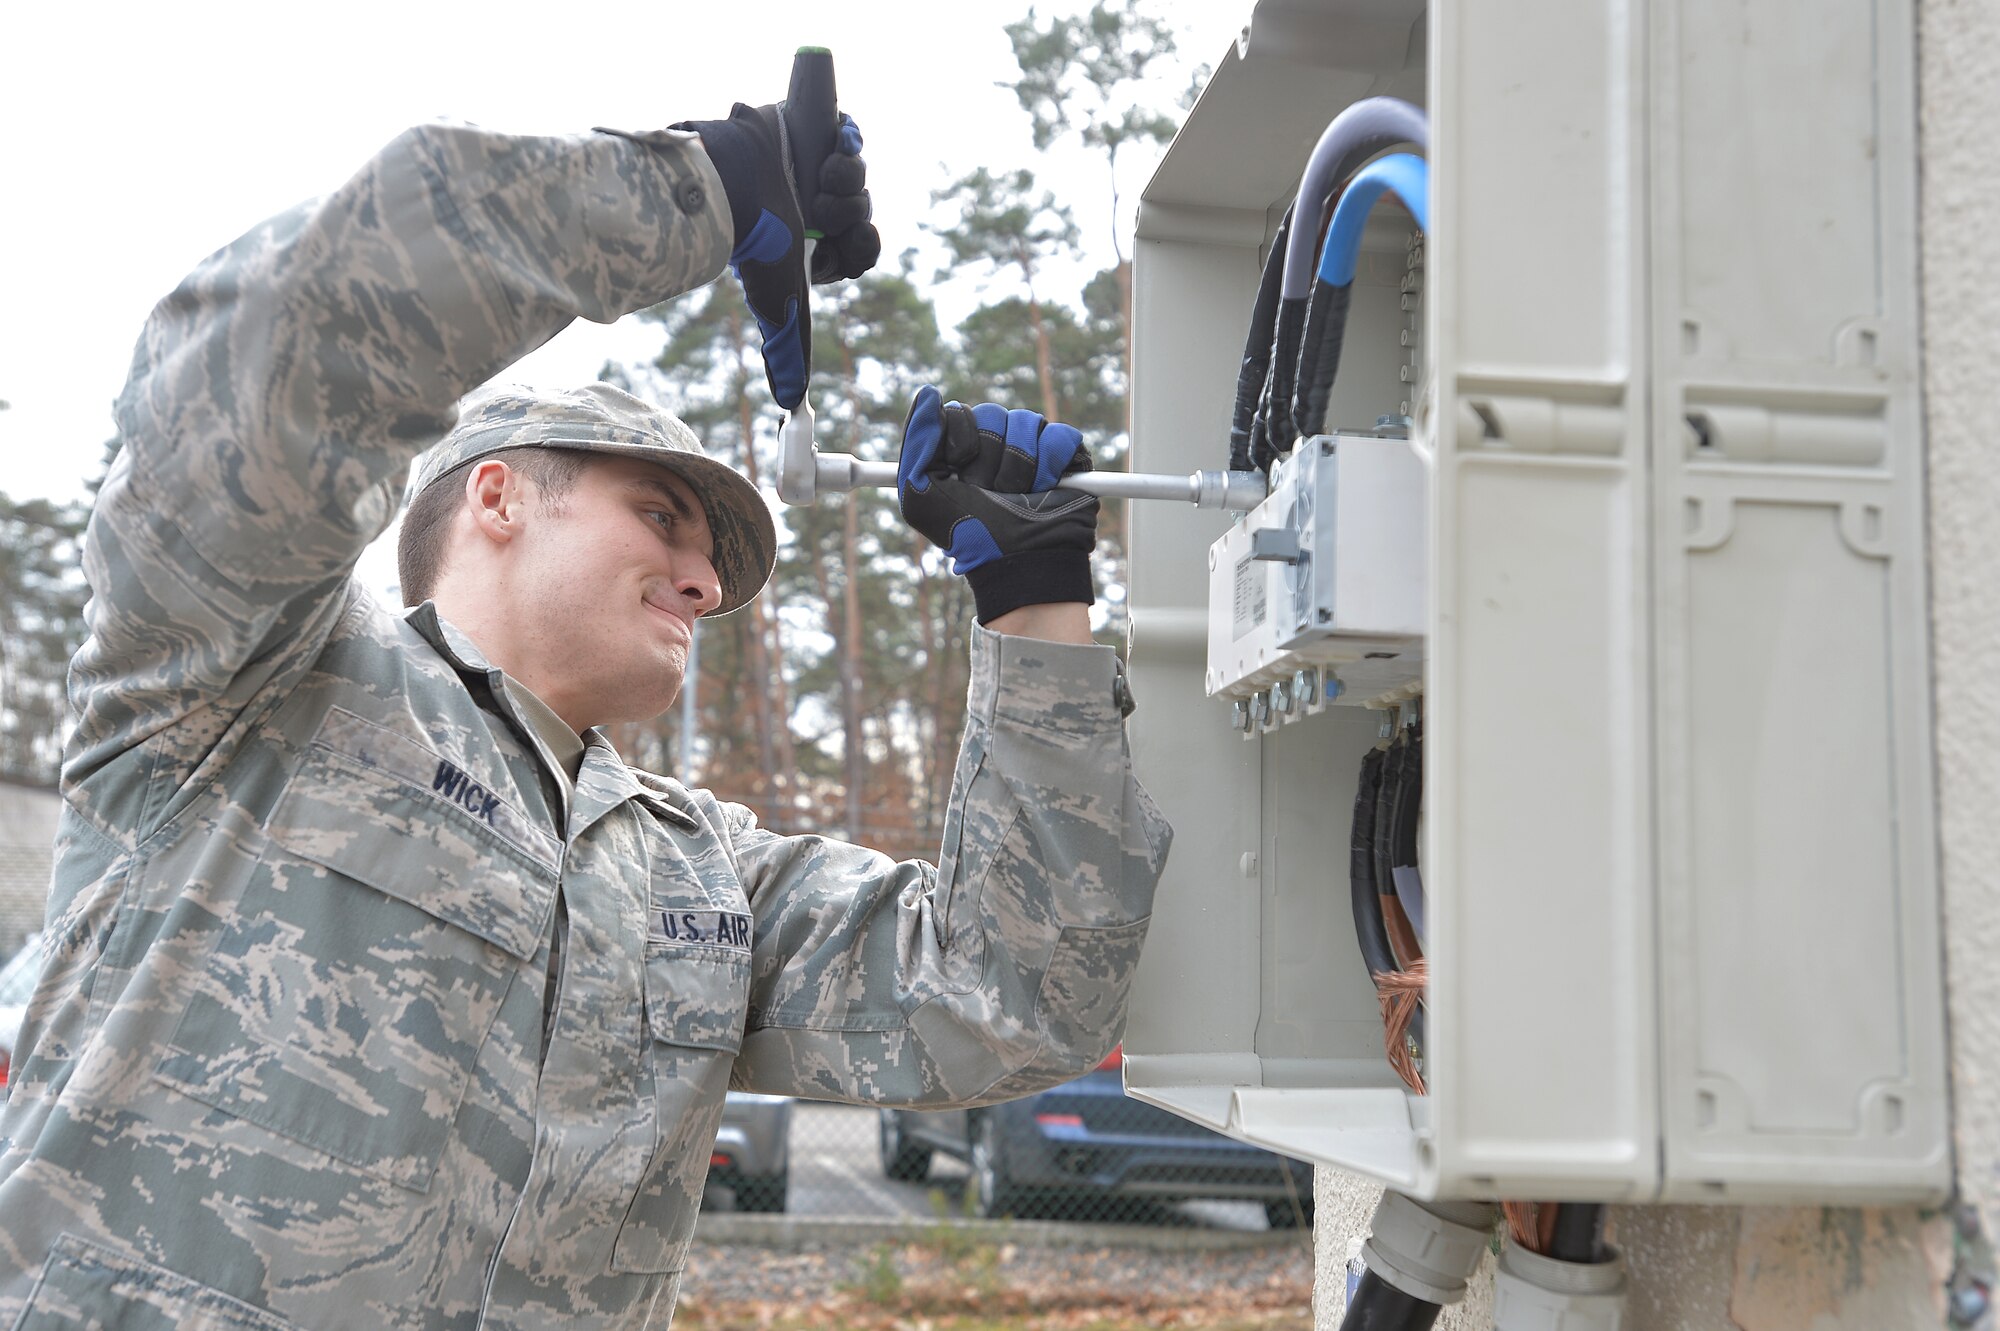 Senior Airman Nicholas Wick, 786th CES electrical systems journeyman, installs a double-throw switch for back up emergency power for the base water supply on Ramstein Air Base, Germany, March 8, 2013. Wick won the airman award at this year’s U.S. Air Forces in Europe and Air Forces Africa first quarter awards ceremony.  (U.S. Air Force photo/Airman 1st Class Holly Cook)